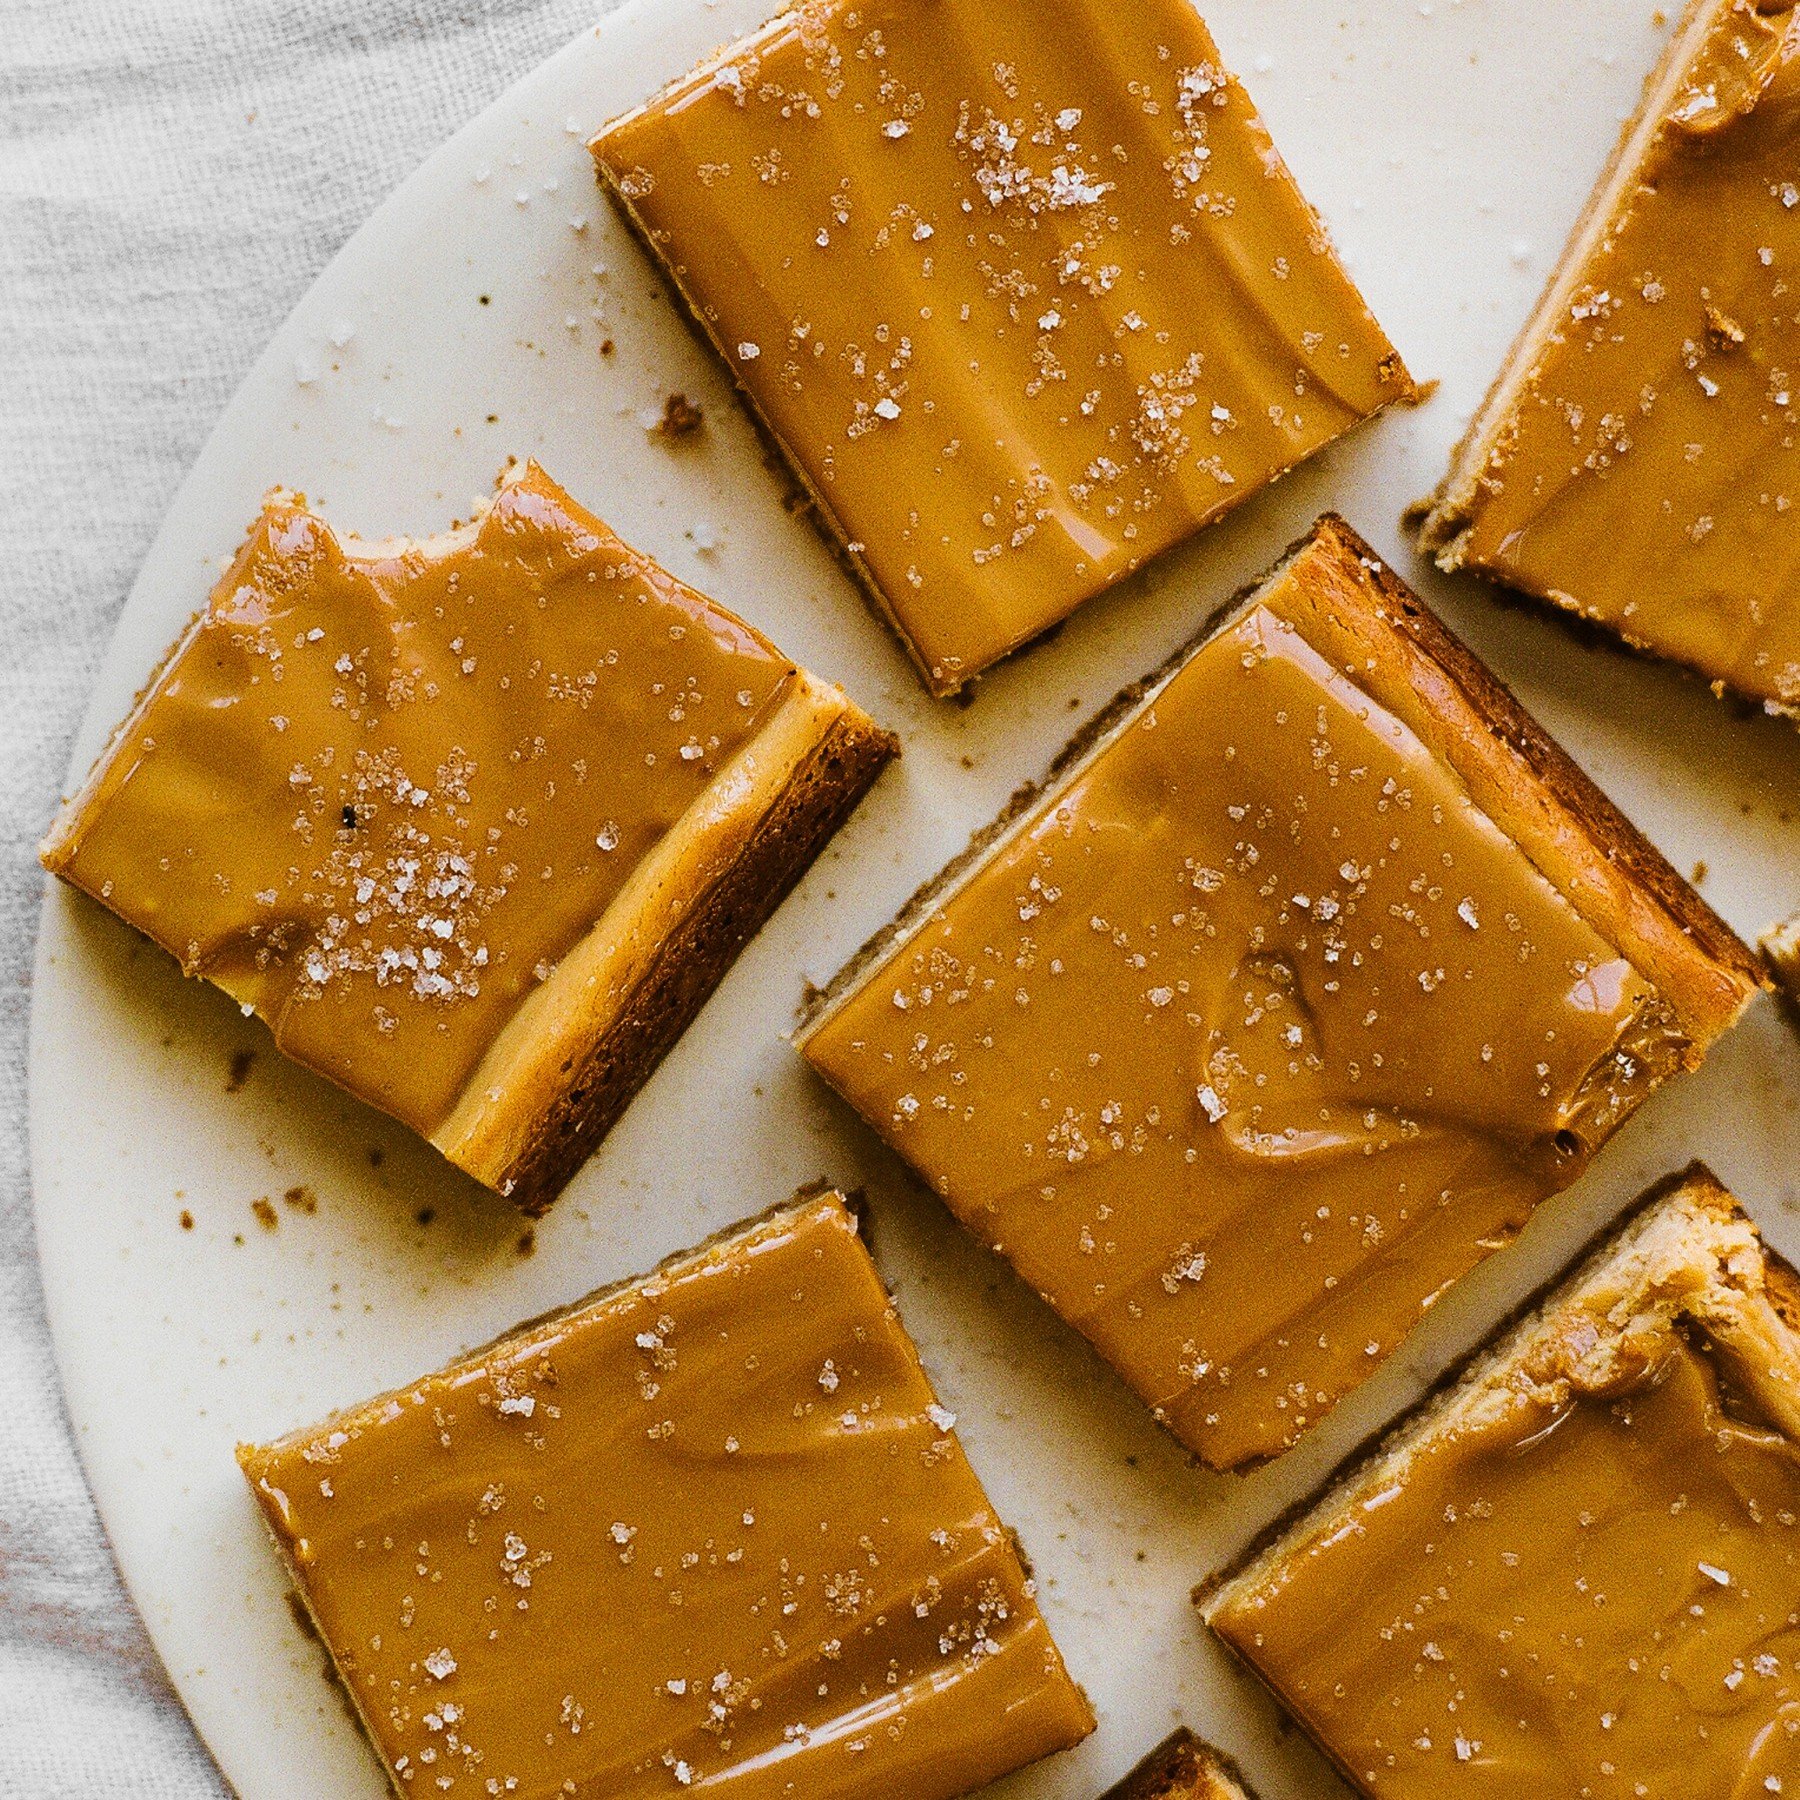 several dulce de leche cheesecake bars on a white plate, ready to serve.